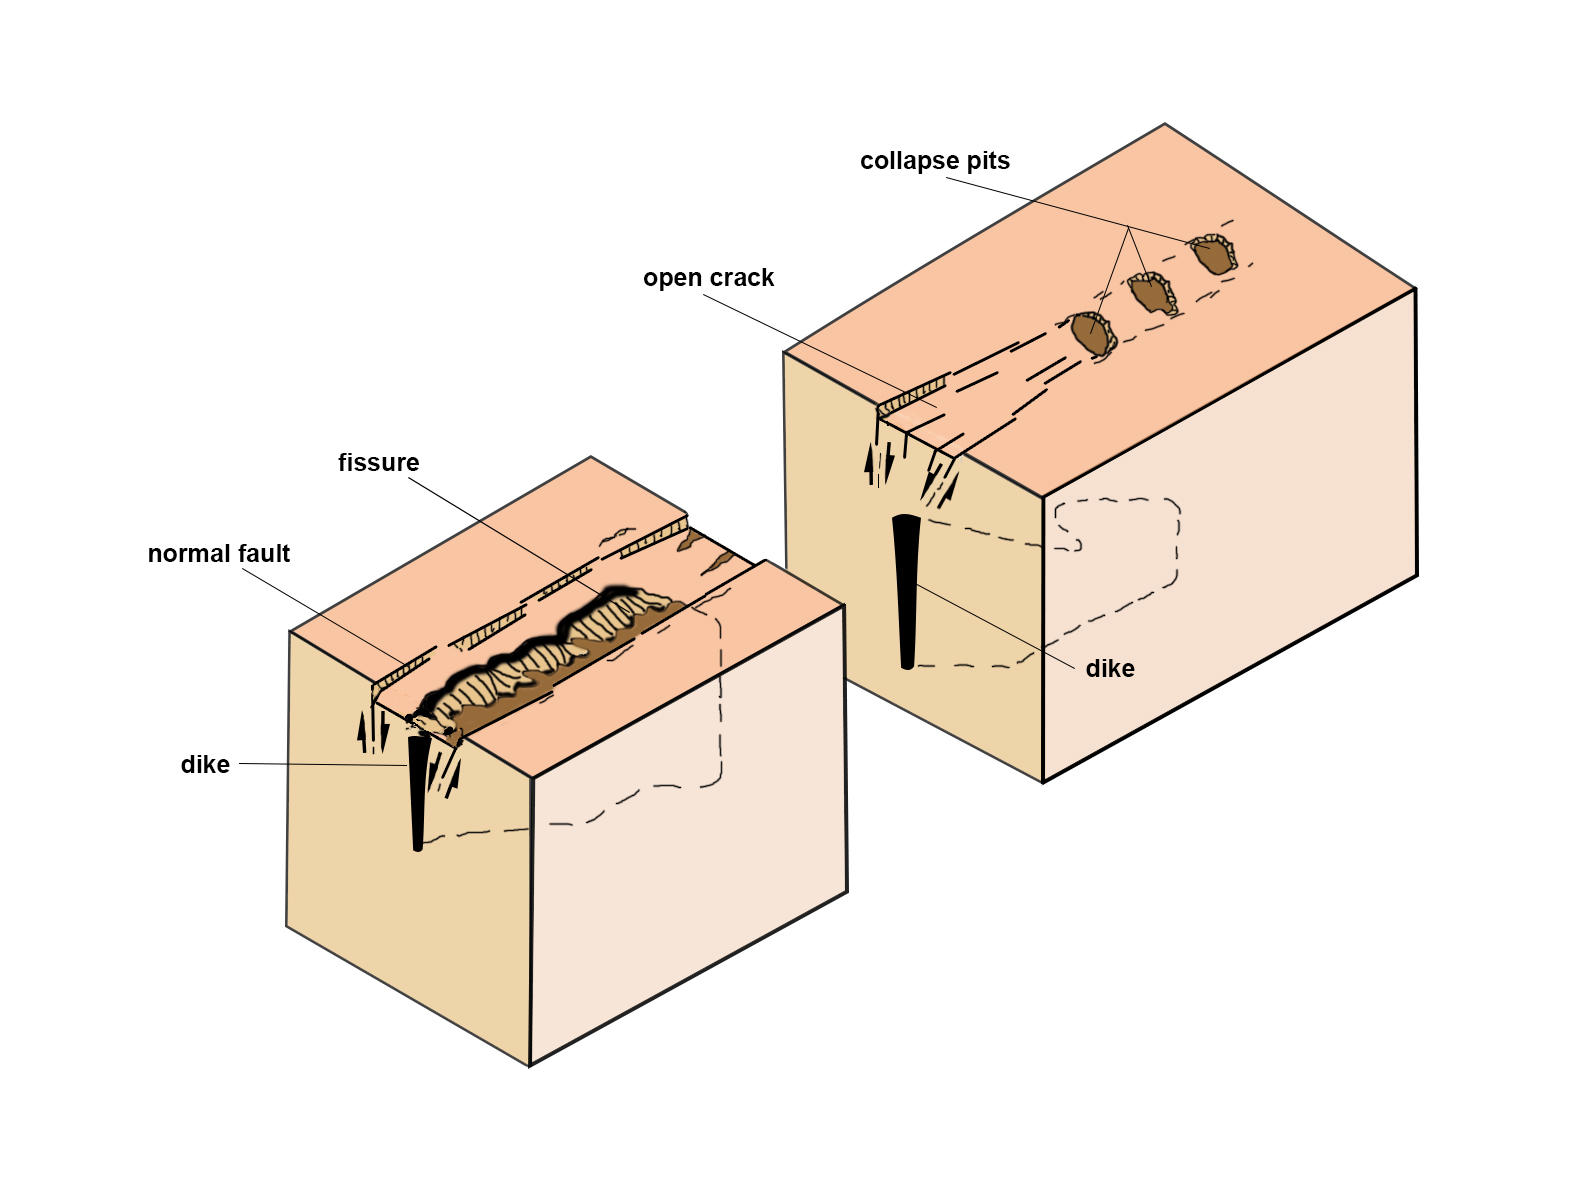 Schematic of fissure formation above a dike